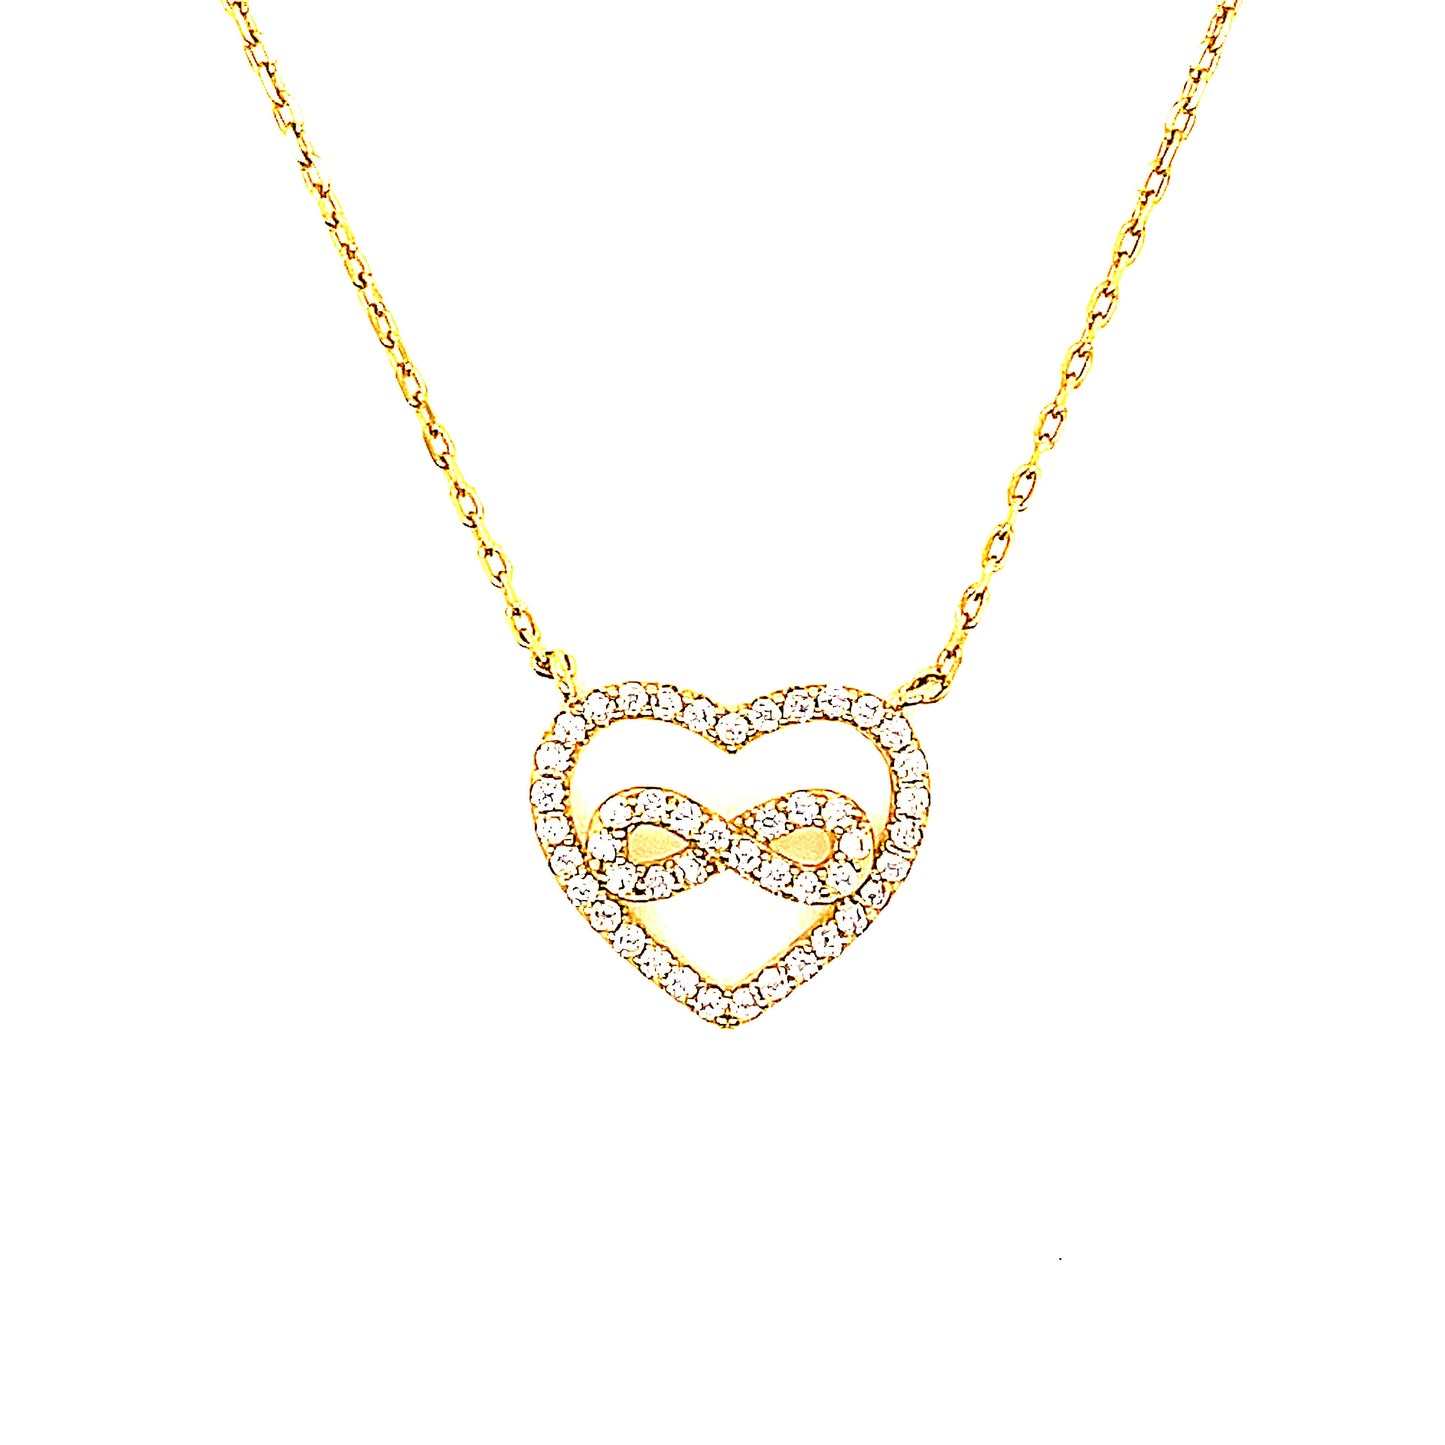 Silver Infinity Love Heart Pendant Necklace